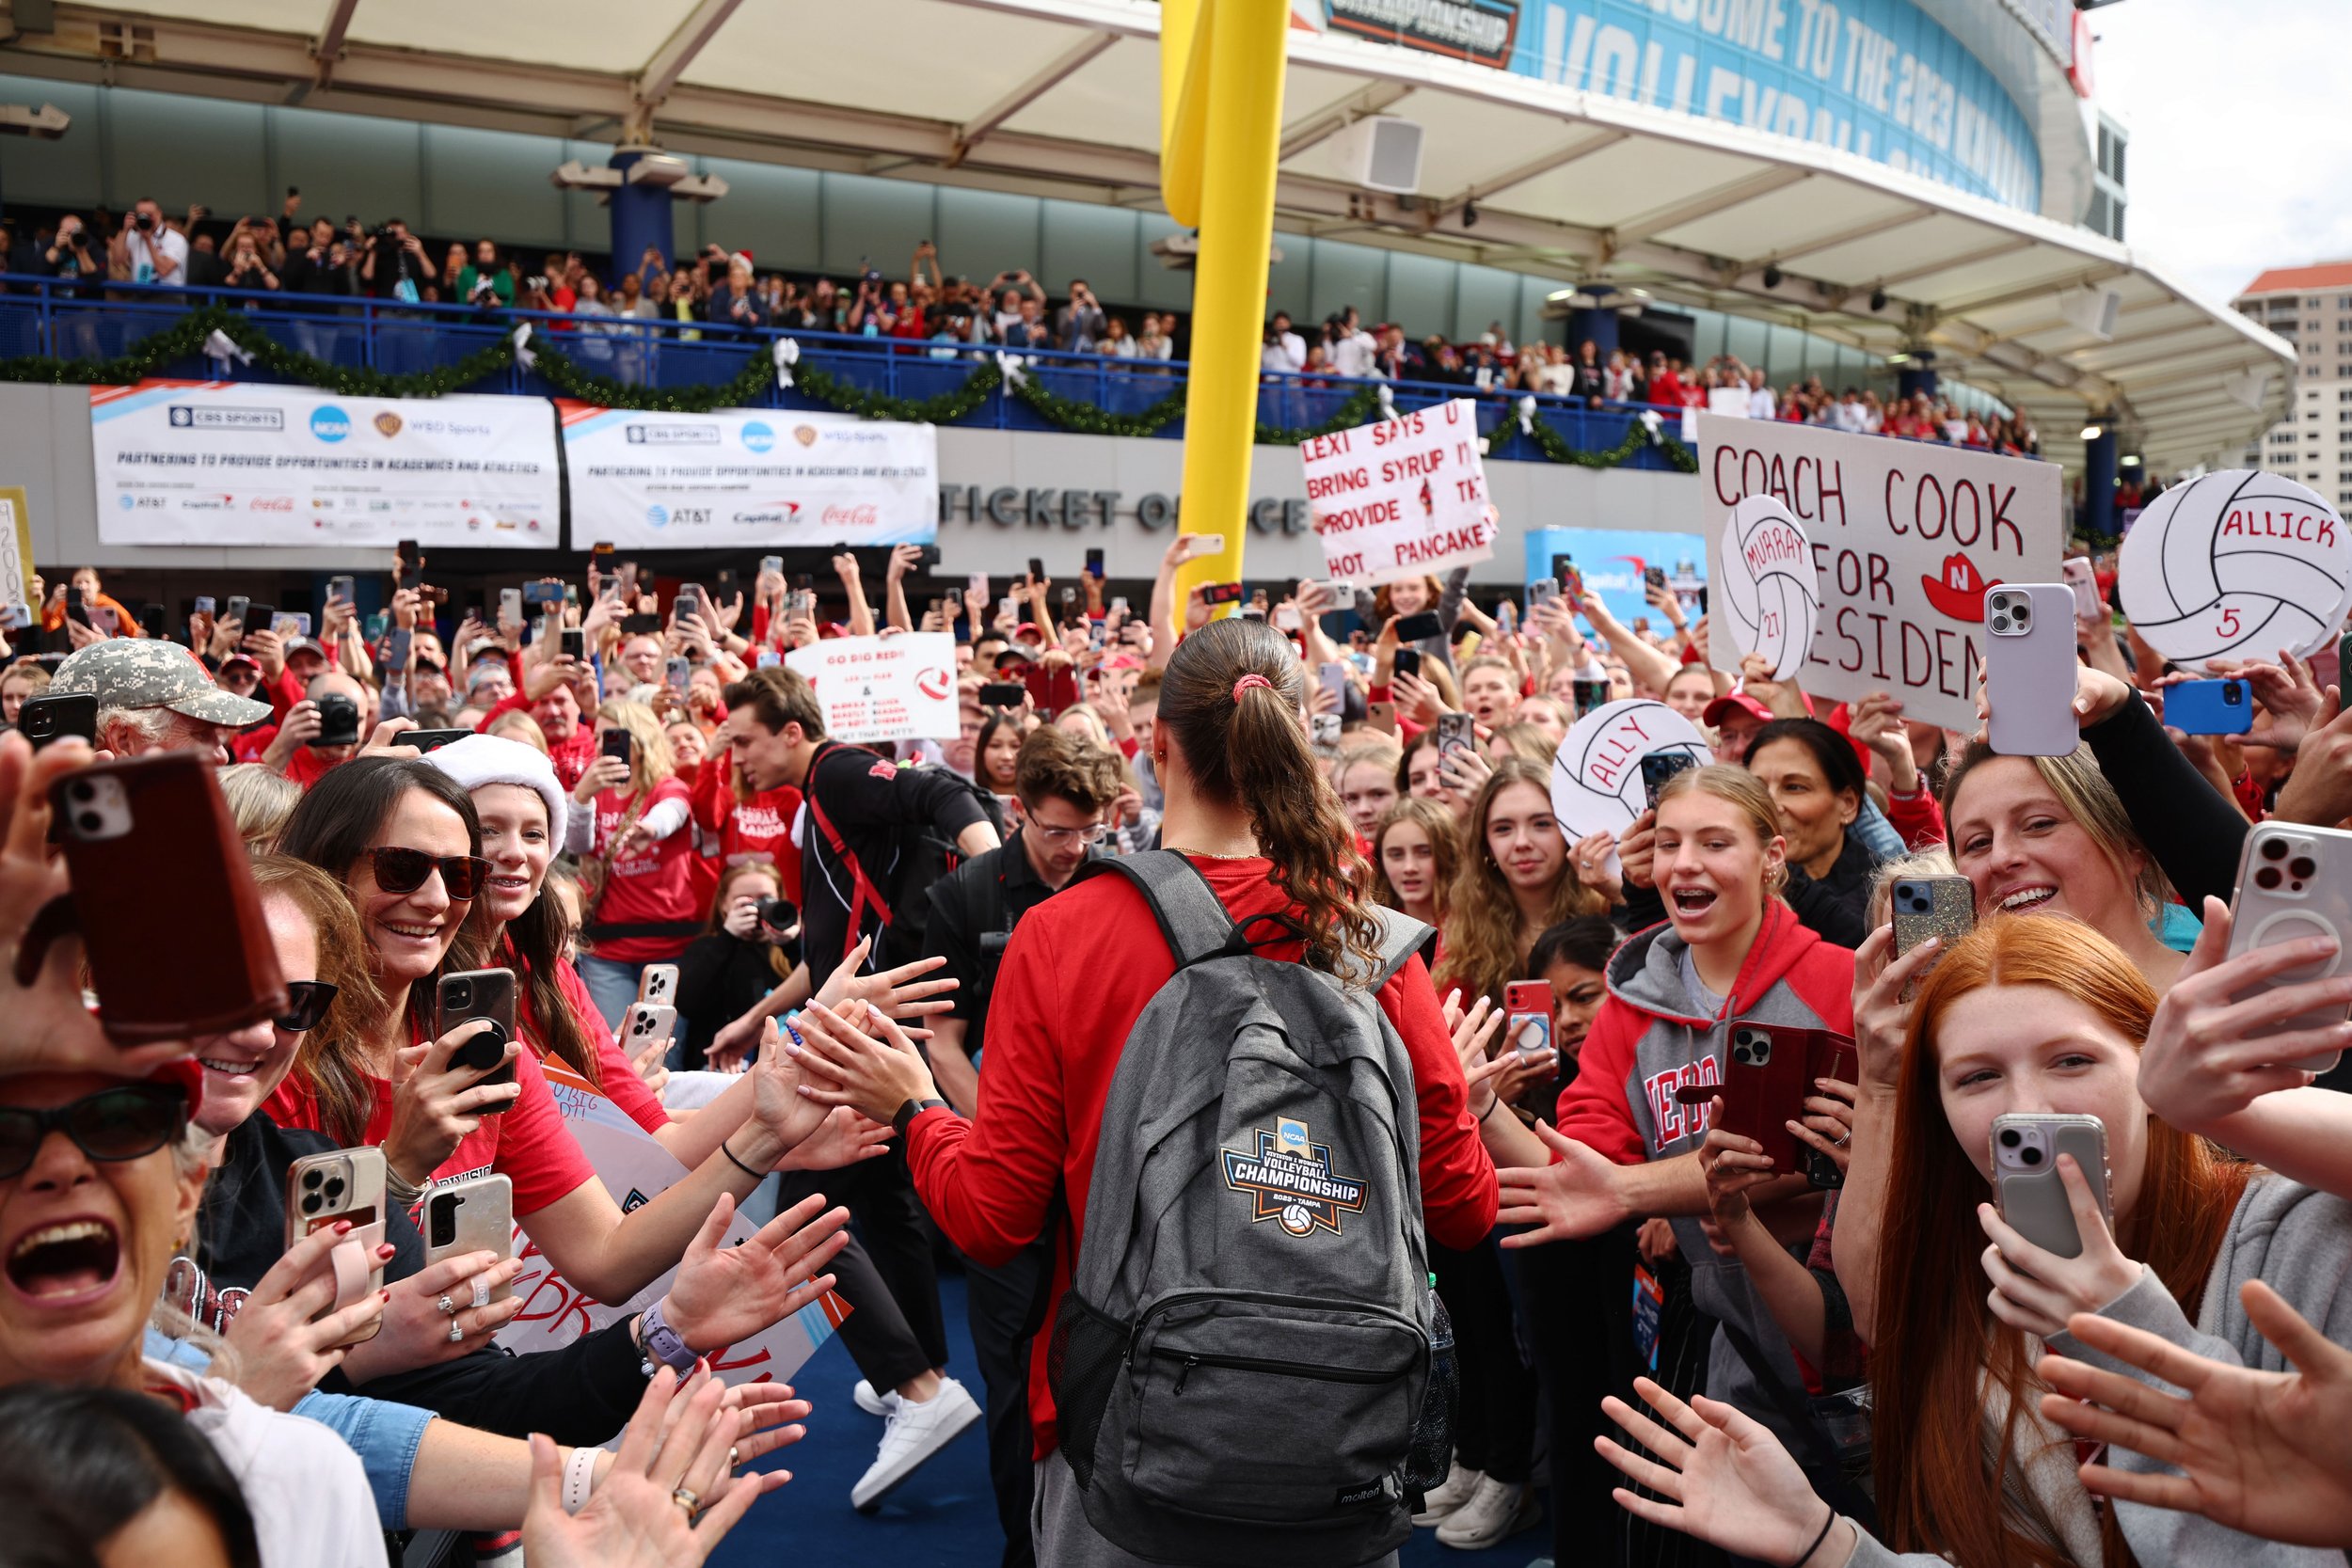  TAMPA, FLORIDA - DECEMBER 17: The Nebraska Cornhuskers arrive at Amalie Arena prior to the 2023 Division I Women's Volleyball Championship against the Texas Longhorns on December 17, 2023 in Tampa, Florida. (Photo by Jamie Schwaberow/NCAA Photos via